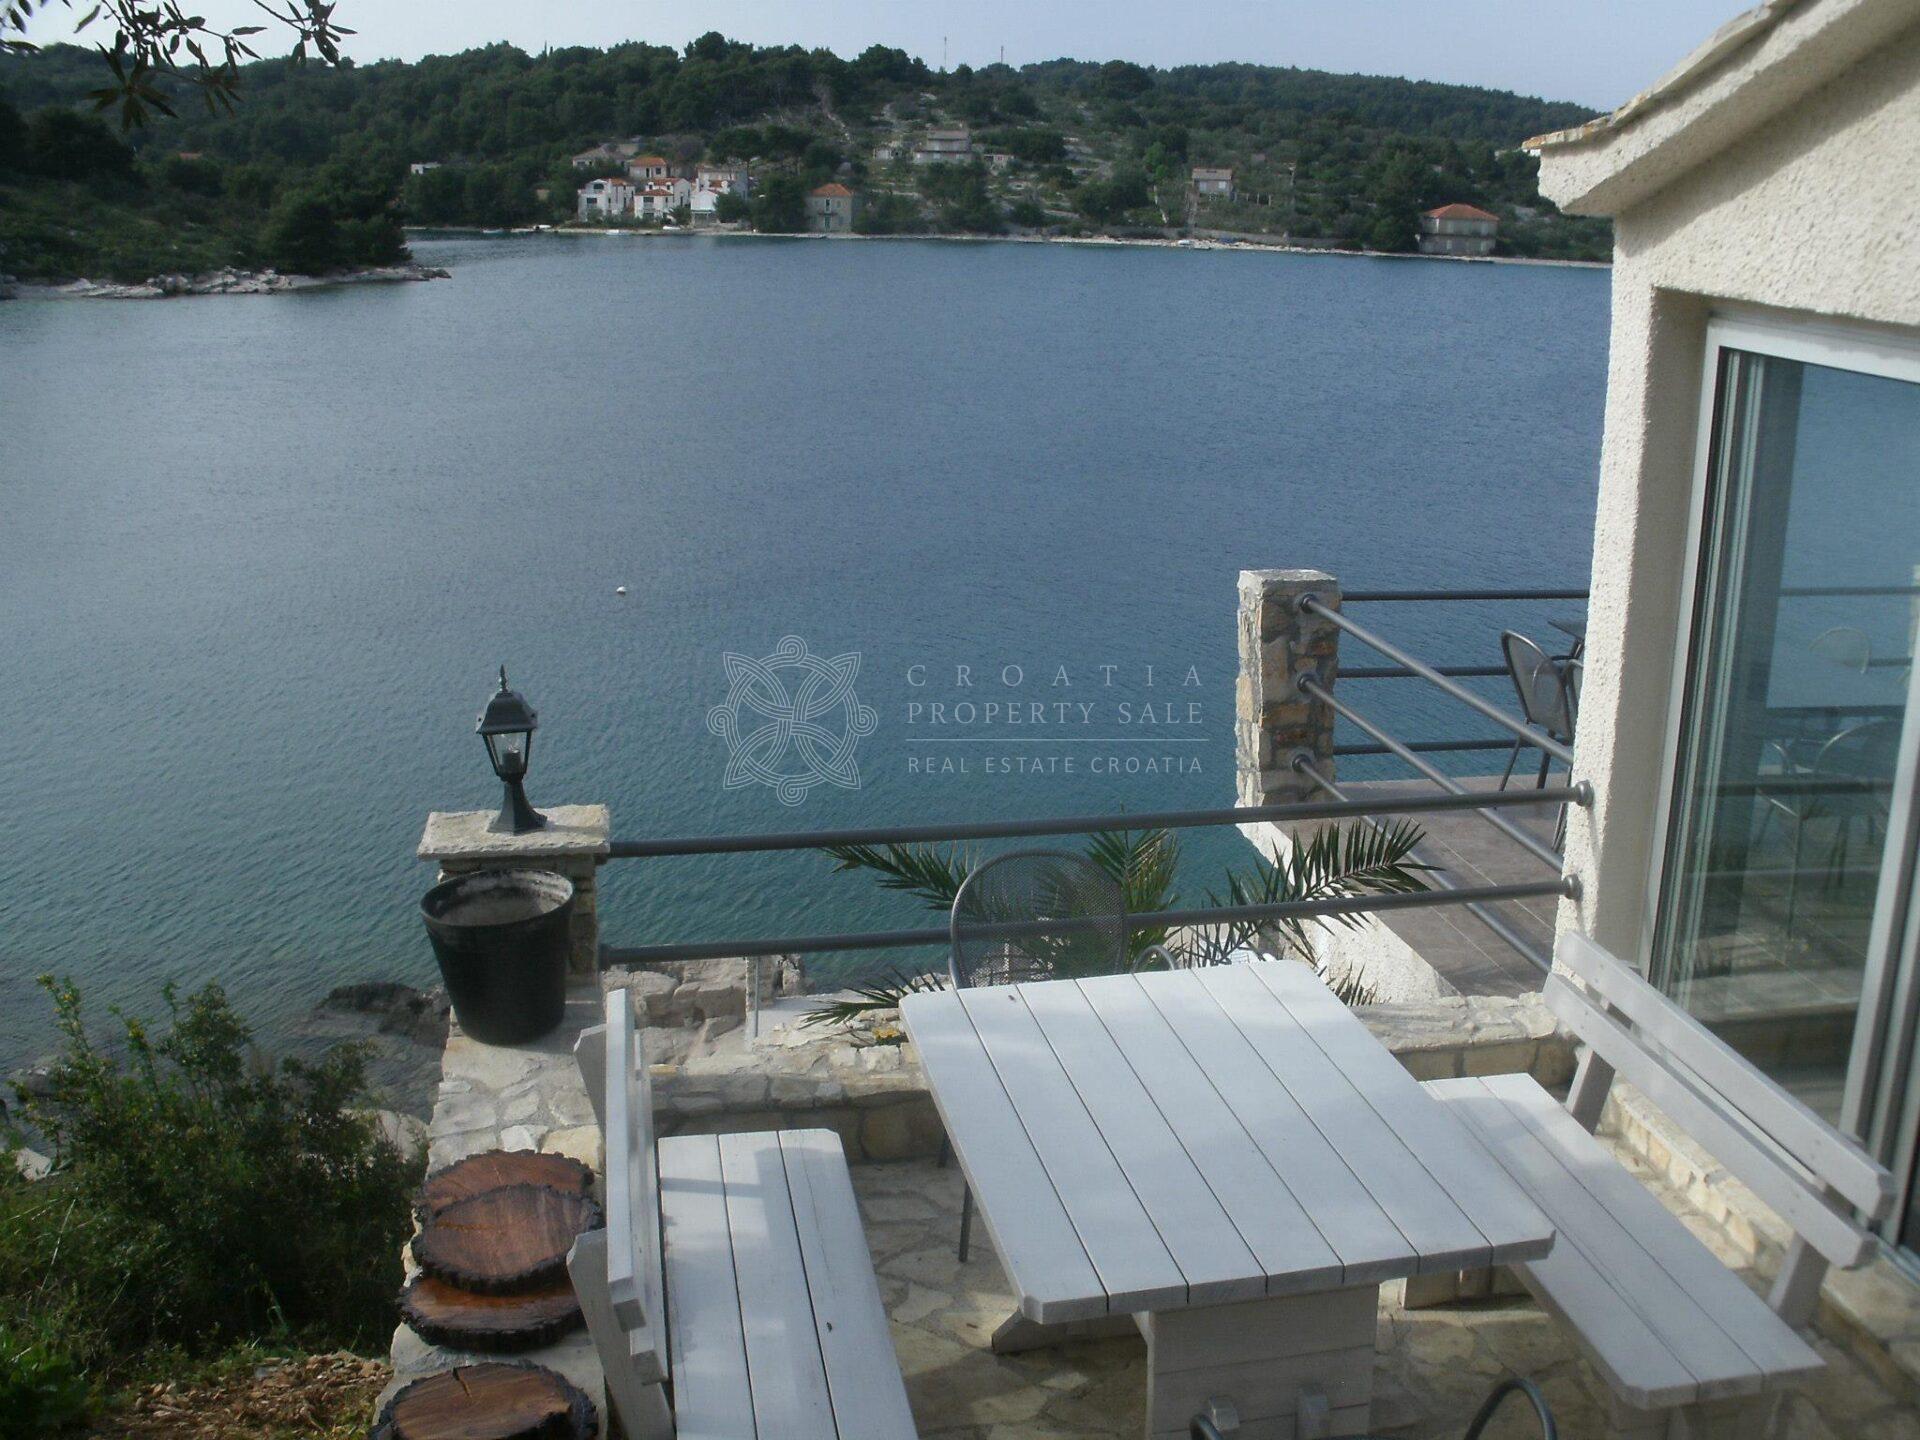 Croatia real estate for sale on the waterfront Solta island